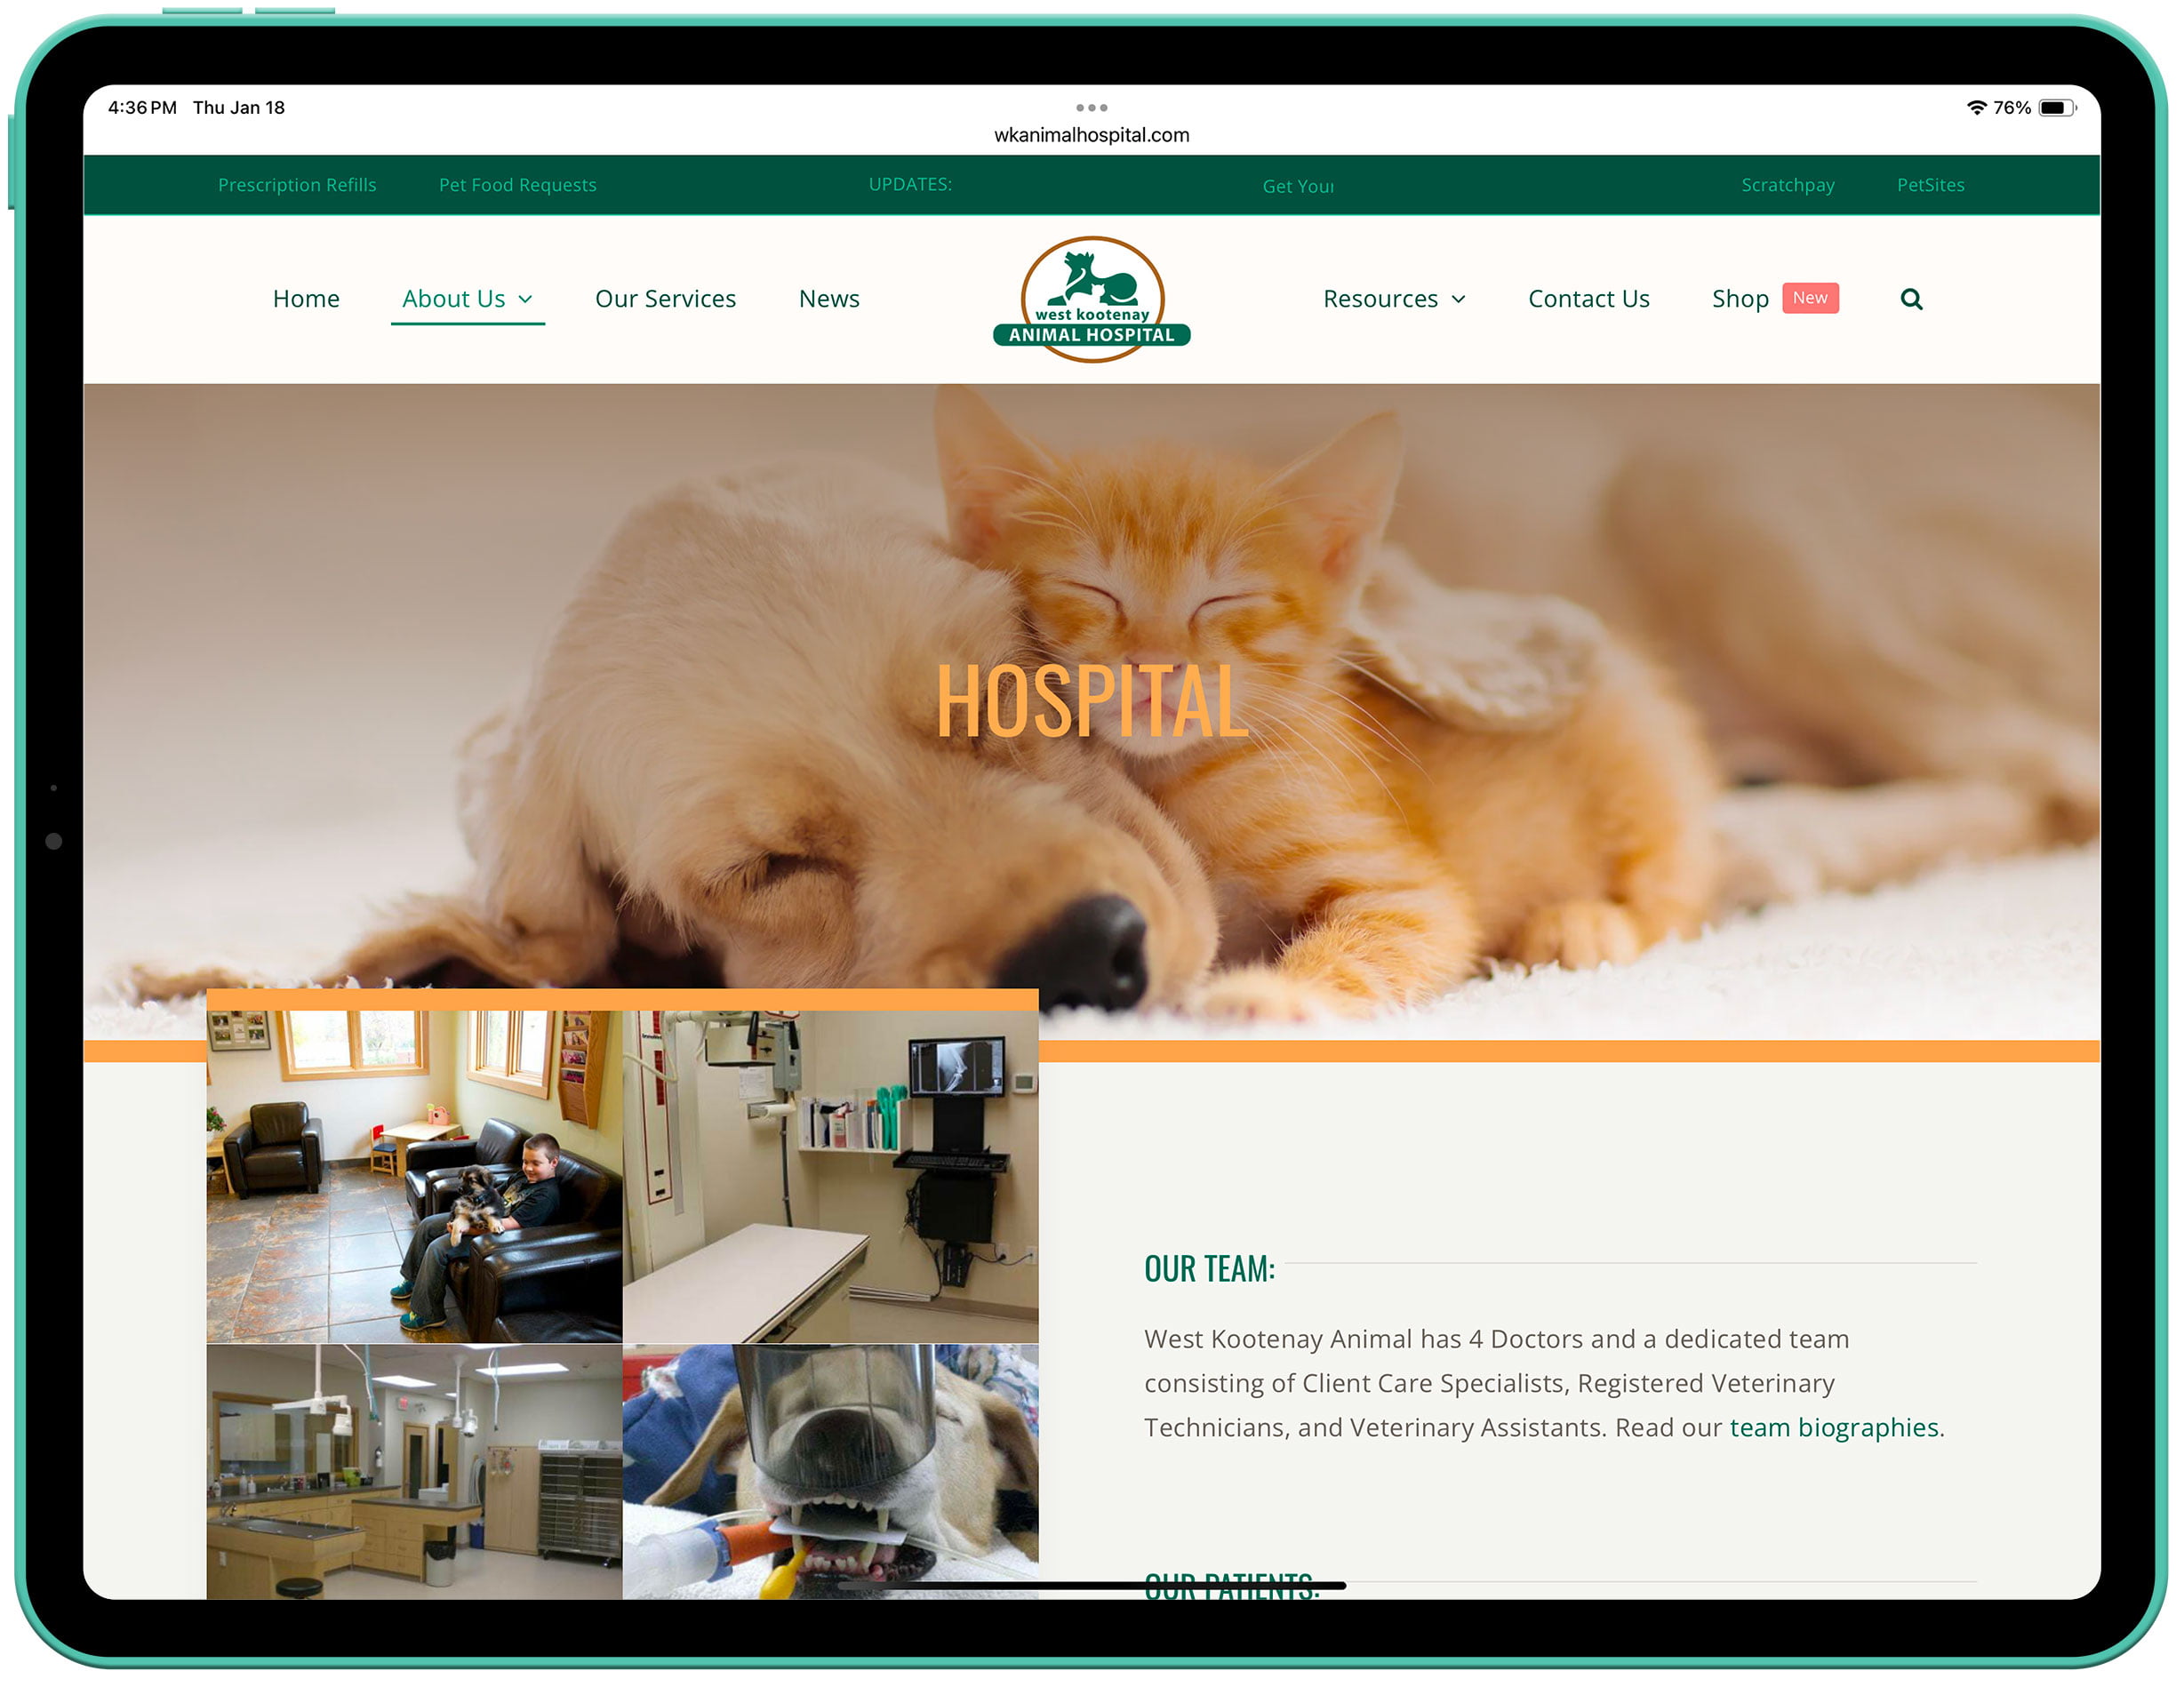 West Kootenay Animal Hospital in Trail BC - Website About Us page - Tablet